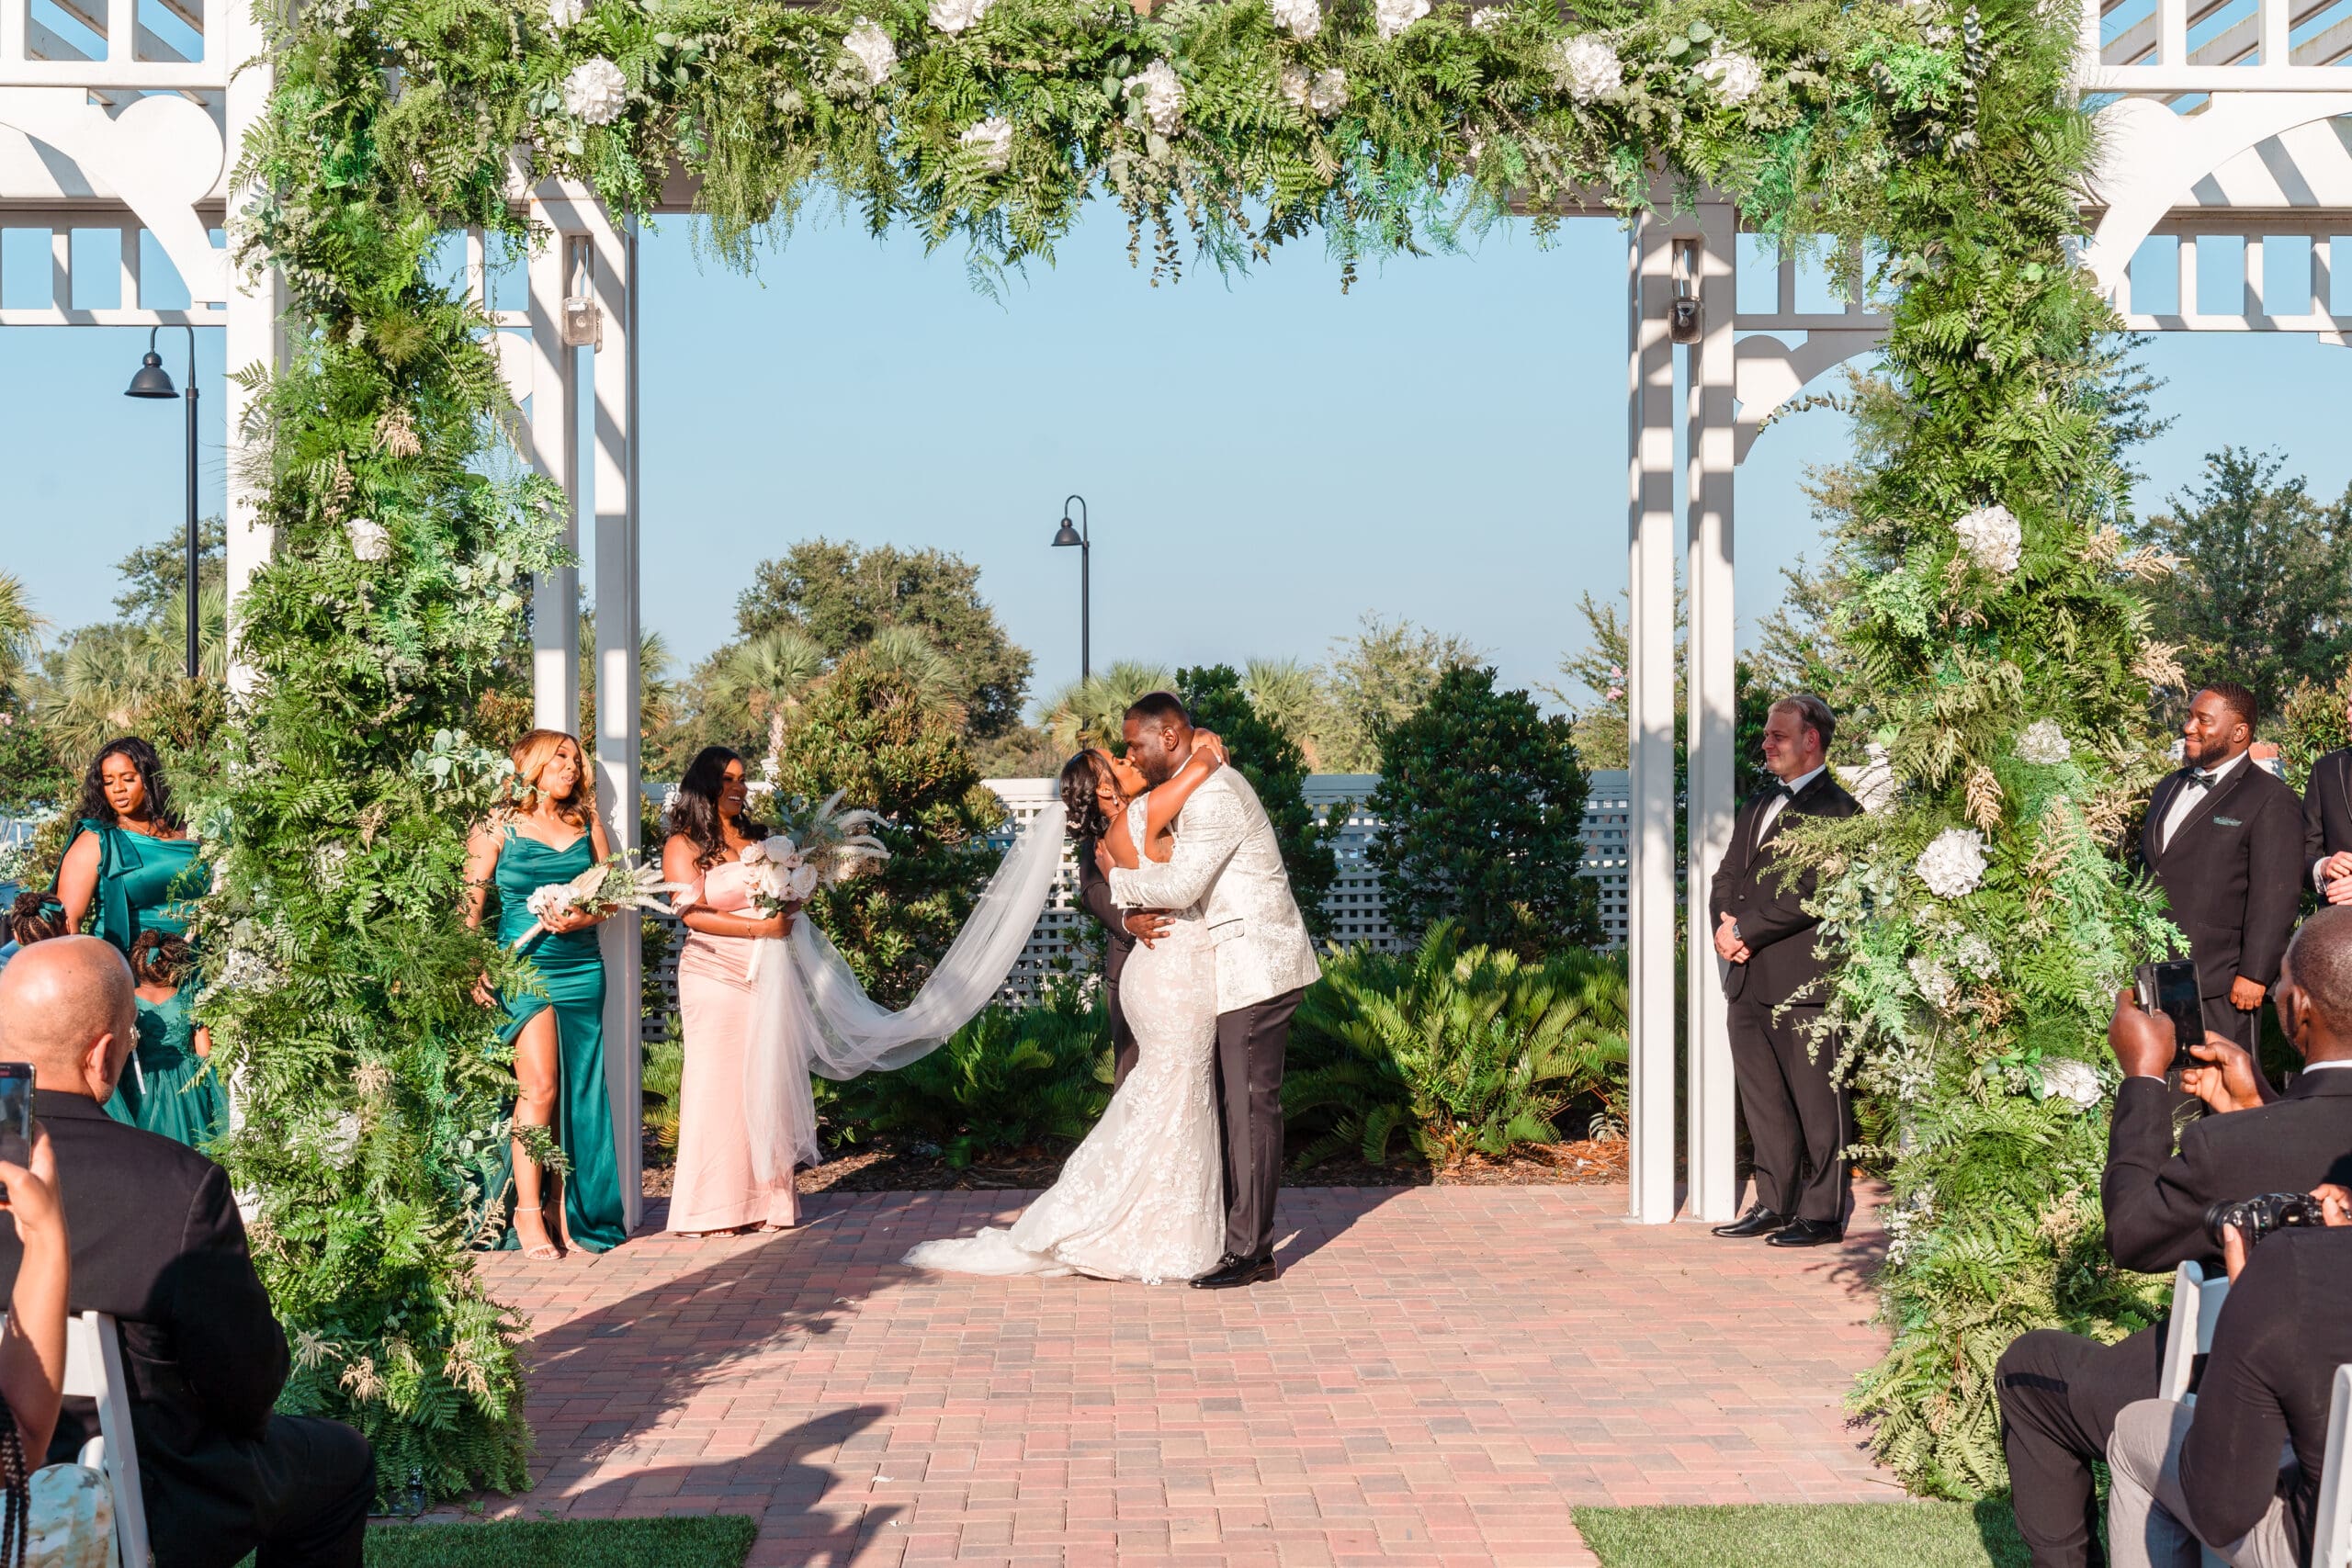 The newlyweds sharing their first kiss as husband and wife at the outdoor altar of Ocoee Lakeshore Center.